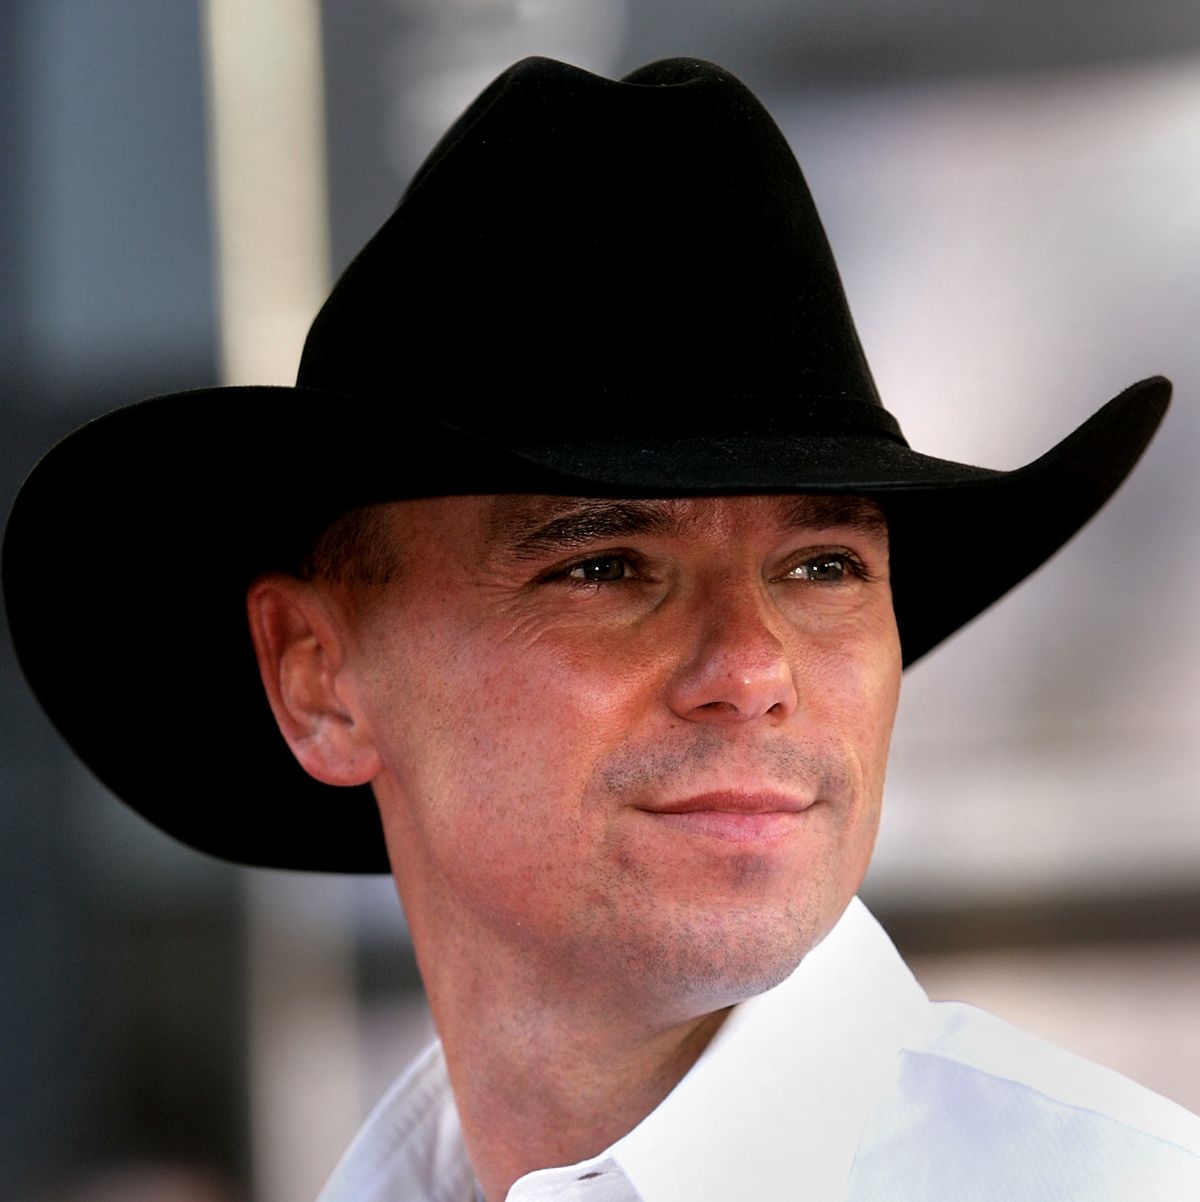 Kenny Chesney: Biography, Country Music Star, Songs, Family